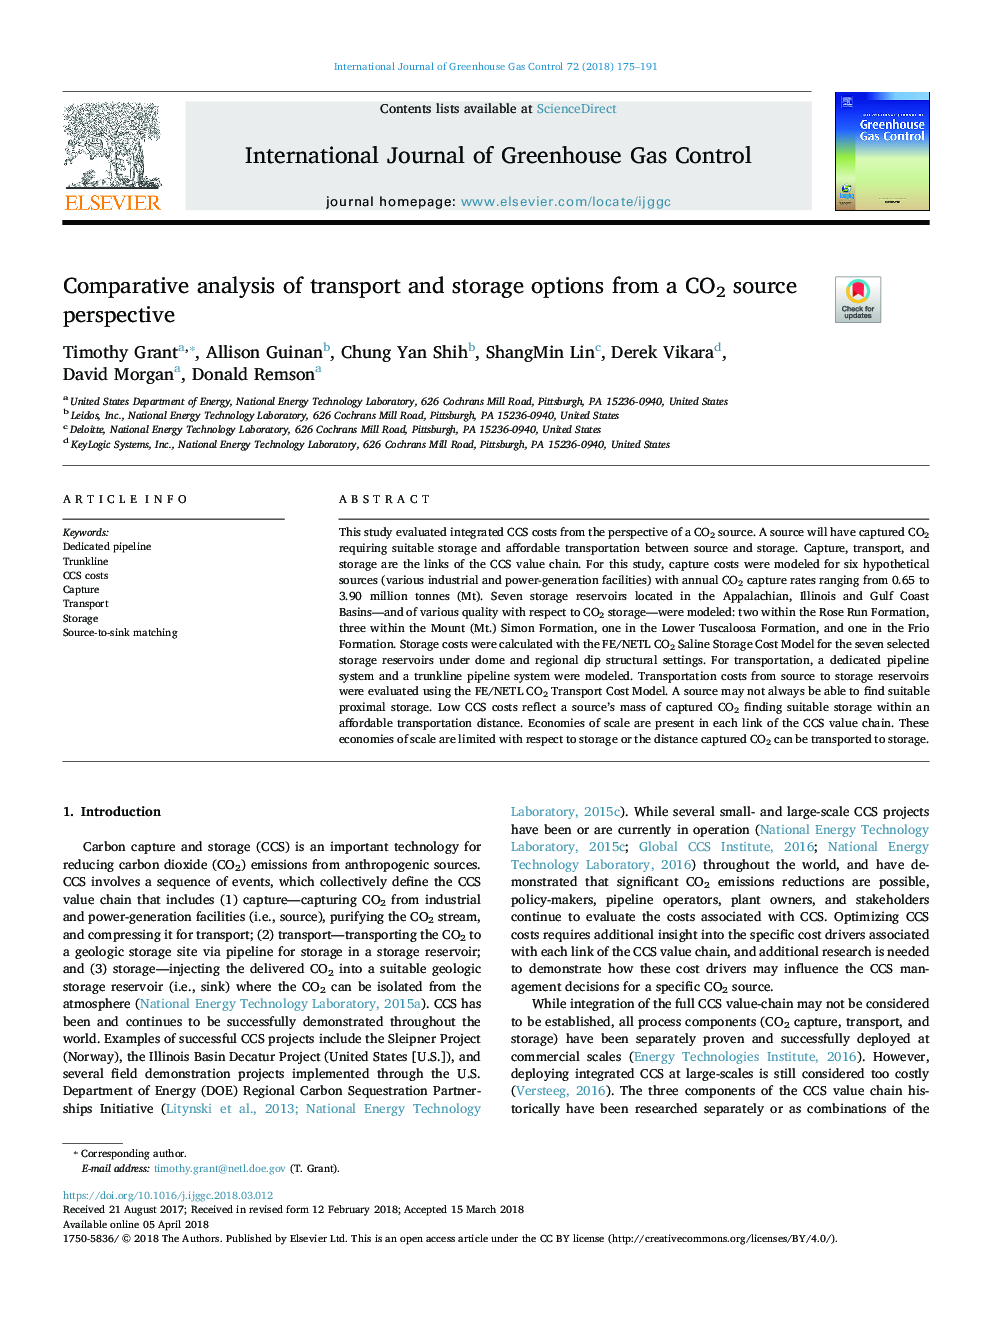 Comparative analysis of transport and storage options from a CO2 source perspective